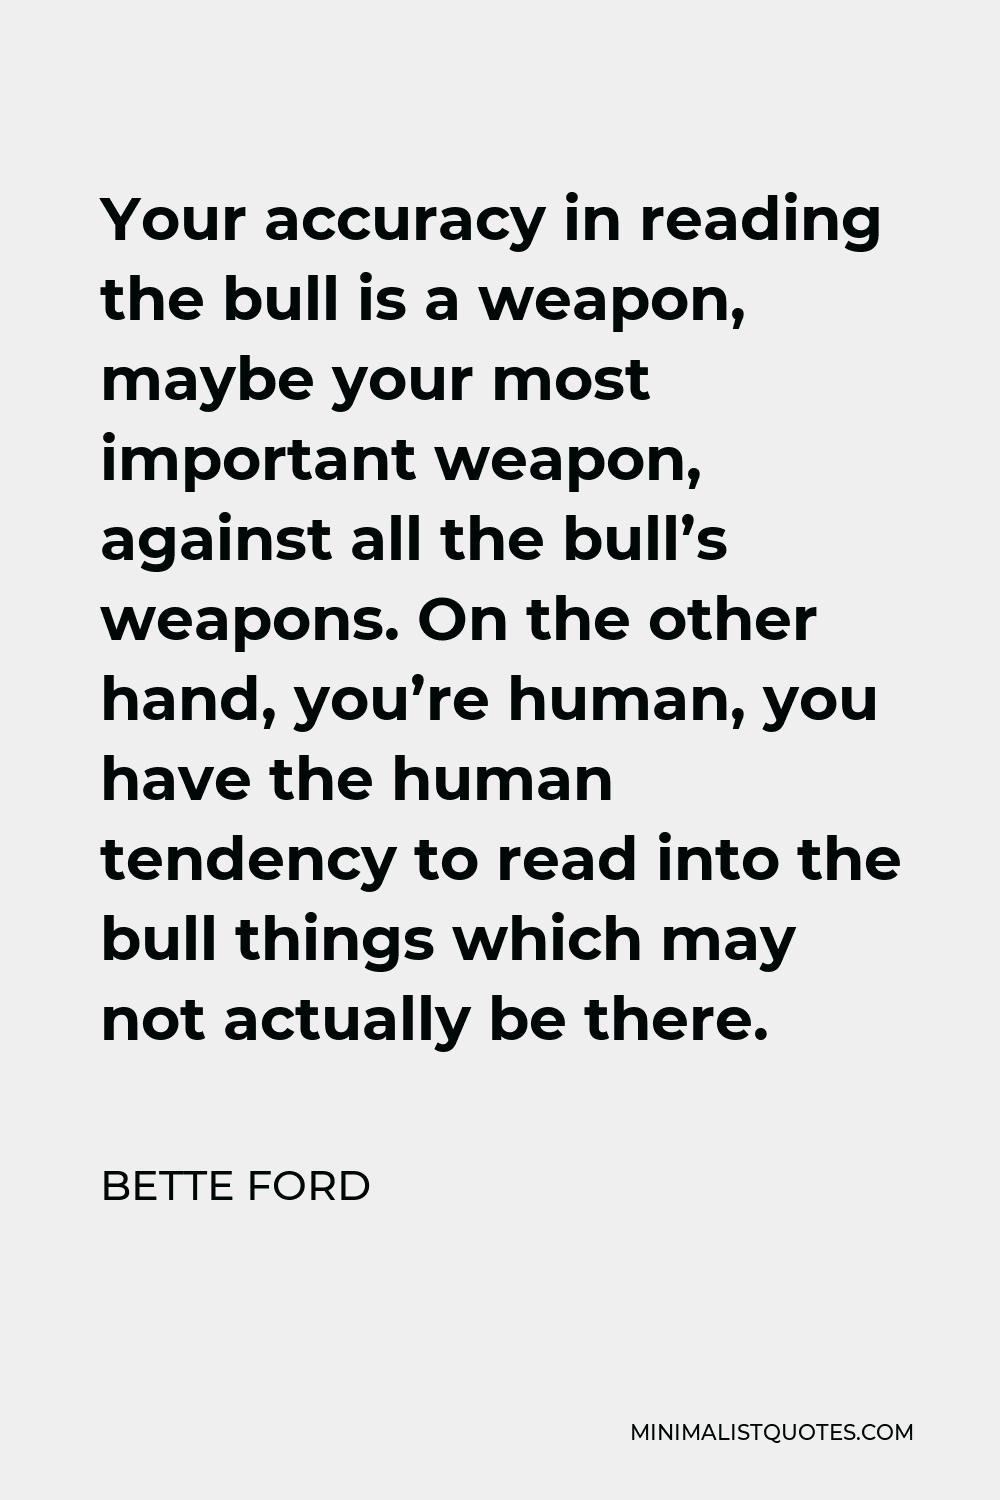 Bette Ford Quote - Your accuracy in reading the bull is a weapon, maybe your most important weapon, against all the bull’s weapons. On the other hand, you’re human, you have the human tendency to read into the bull things which may not actually be there.